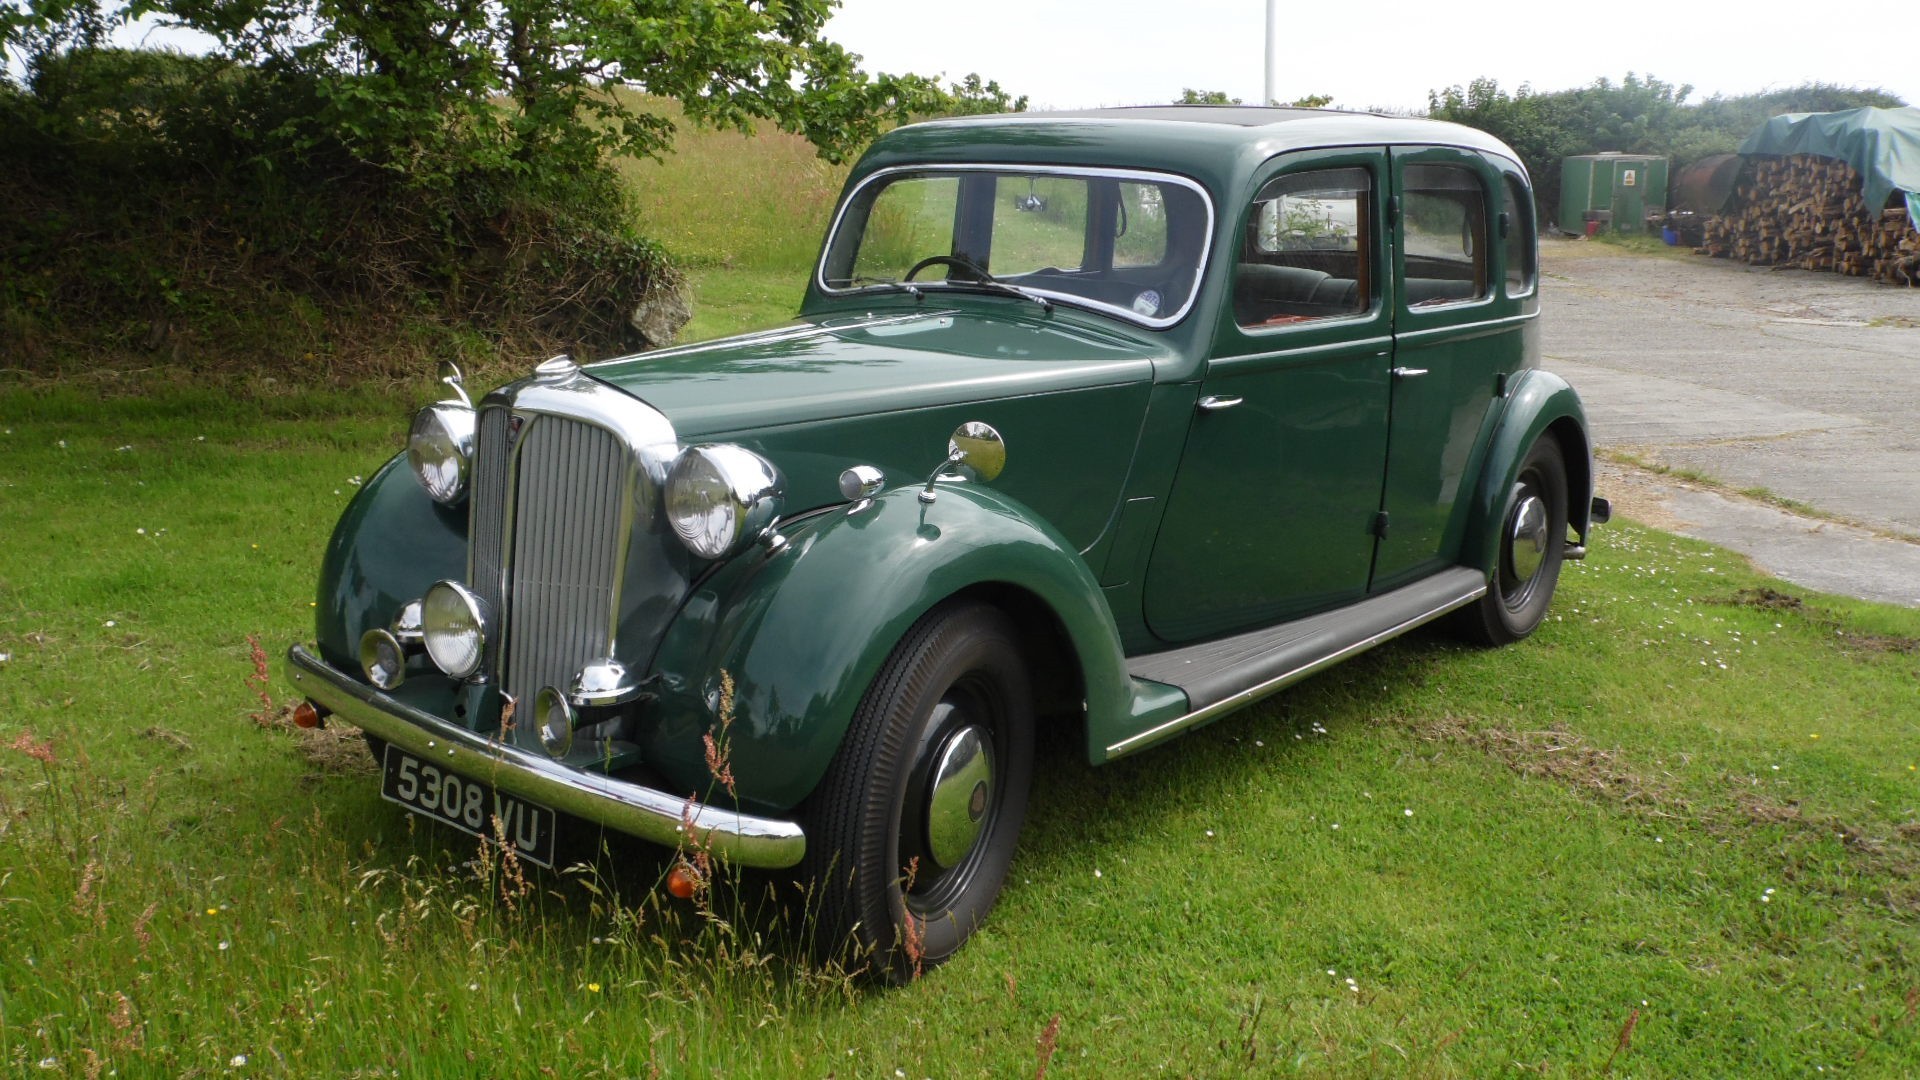 1948 Rover 75 P3 Registration number 5308 VU Green Bought in 2007 as a project Total restoration